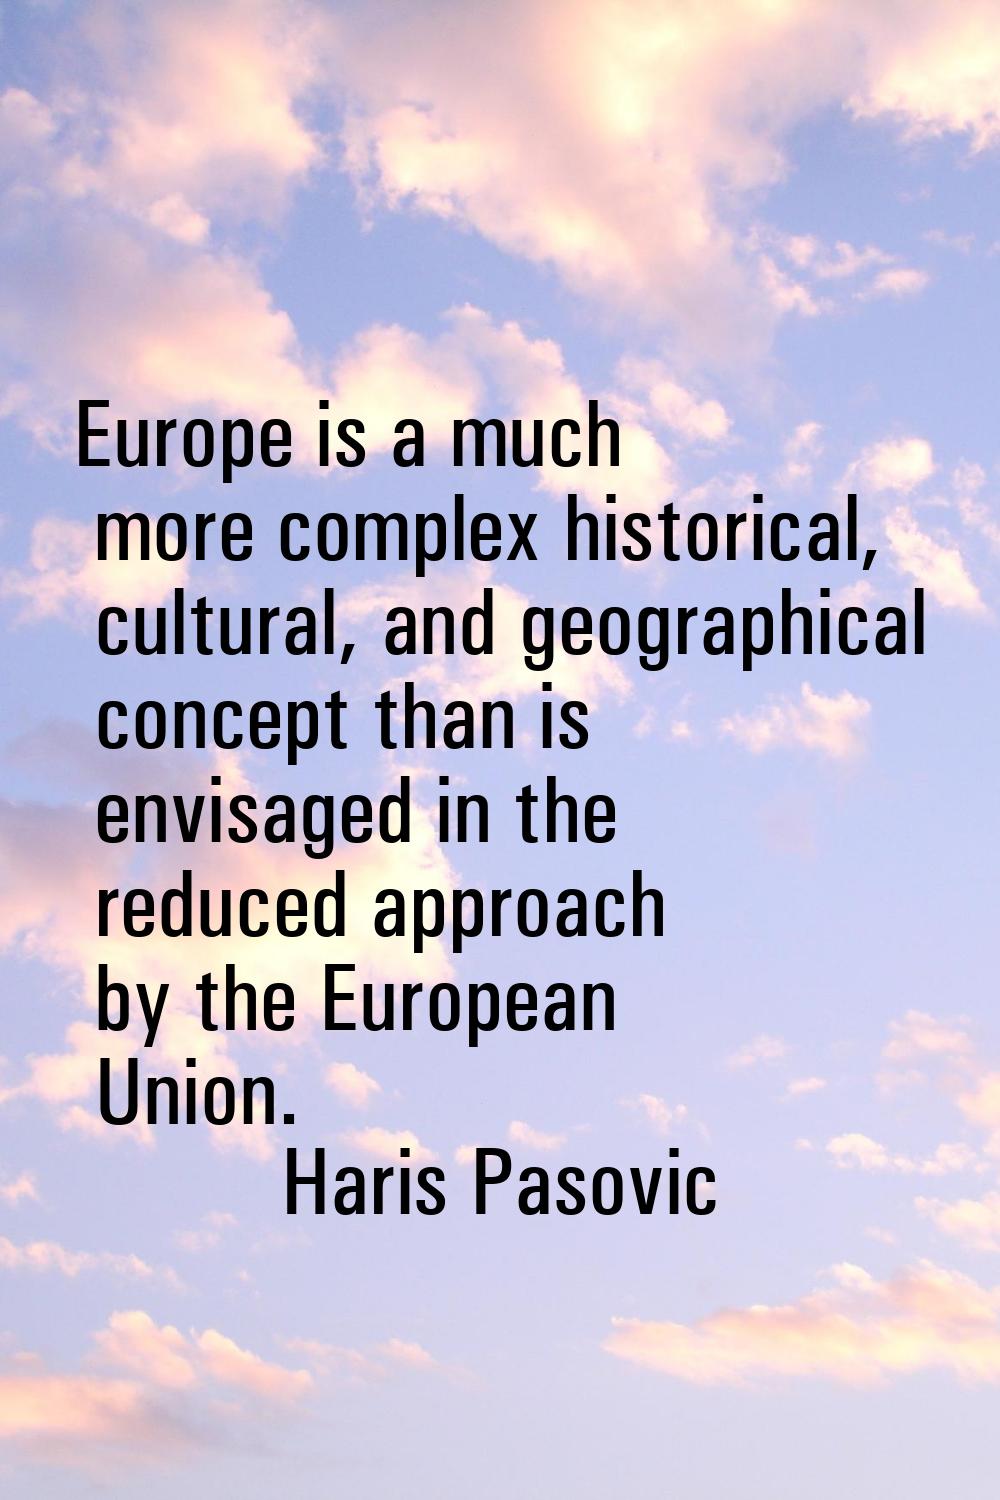 Europe is a much more complex historical, cultural, and geographical concept than is envisaged in t